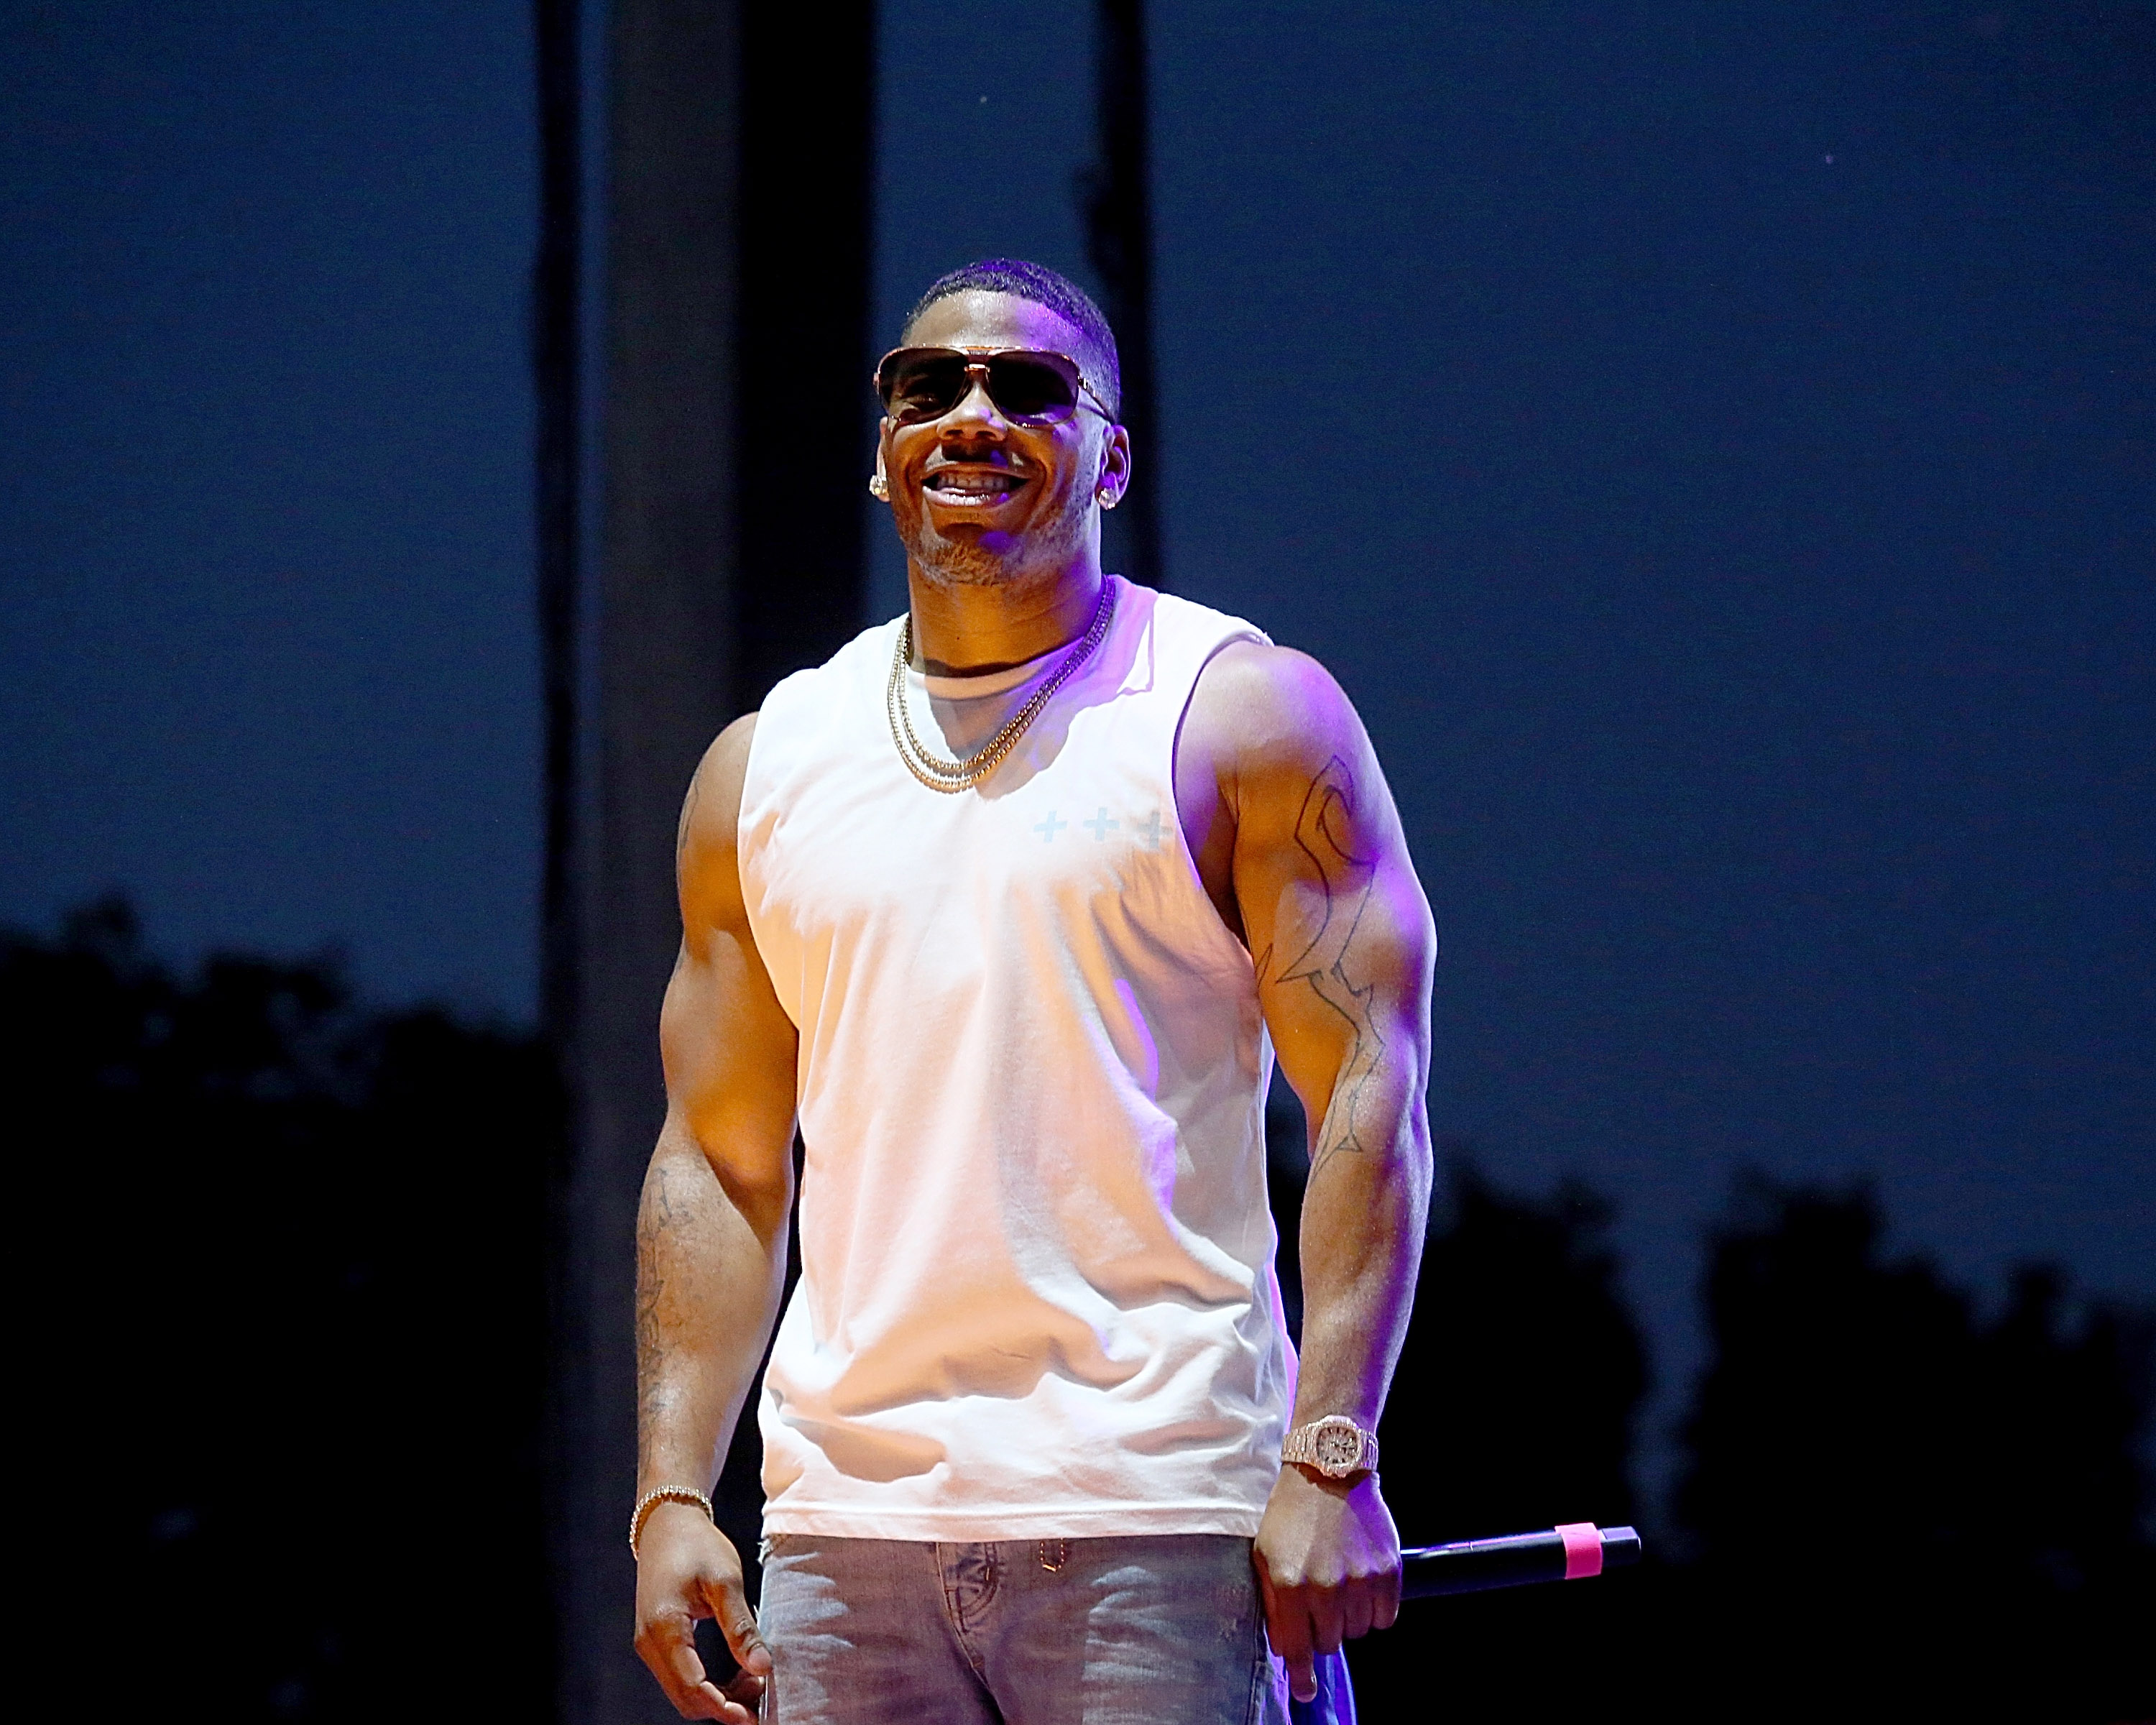 rapper Nelly performing